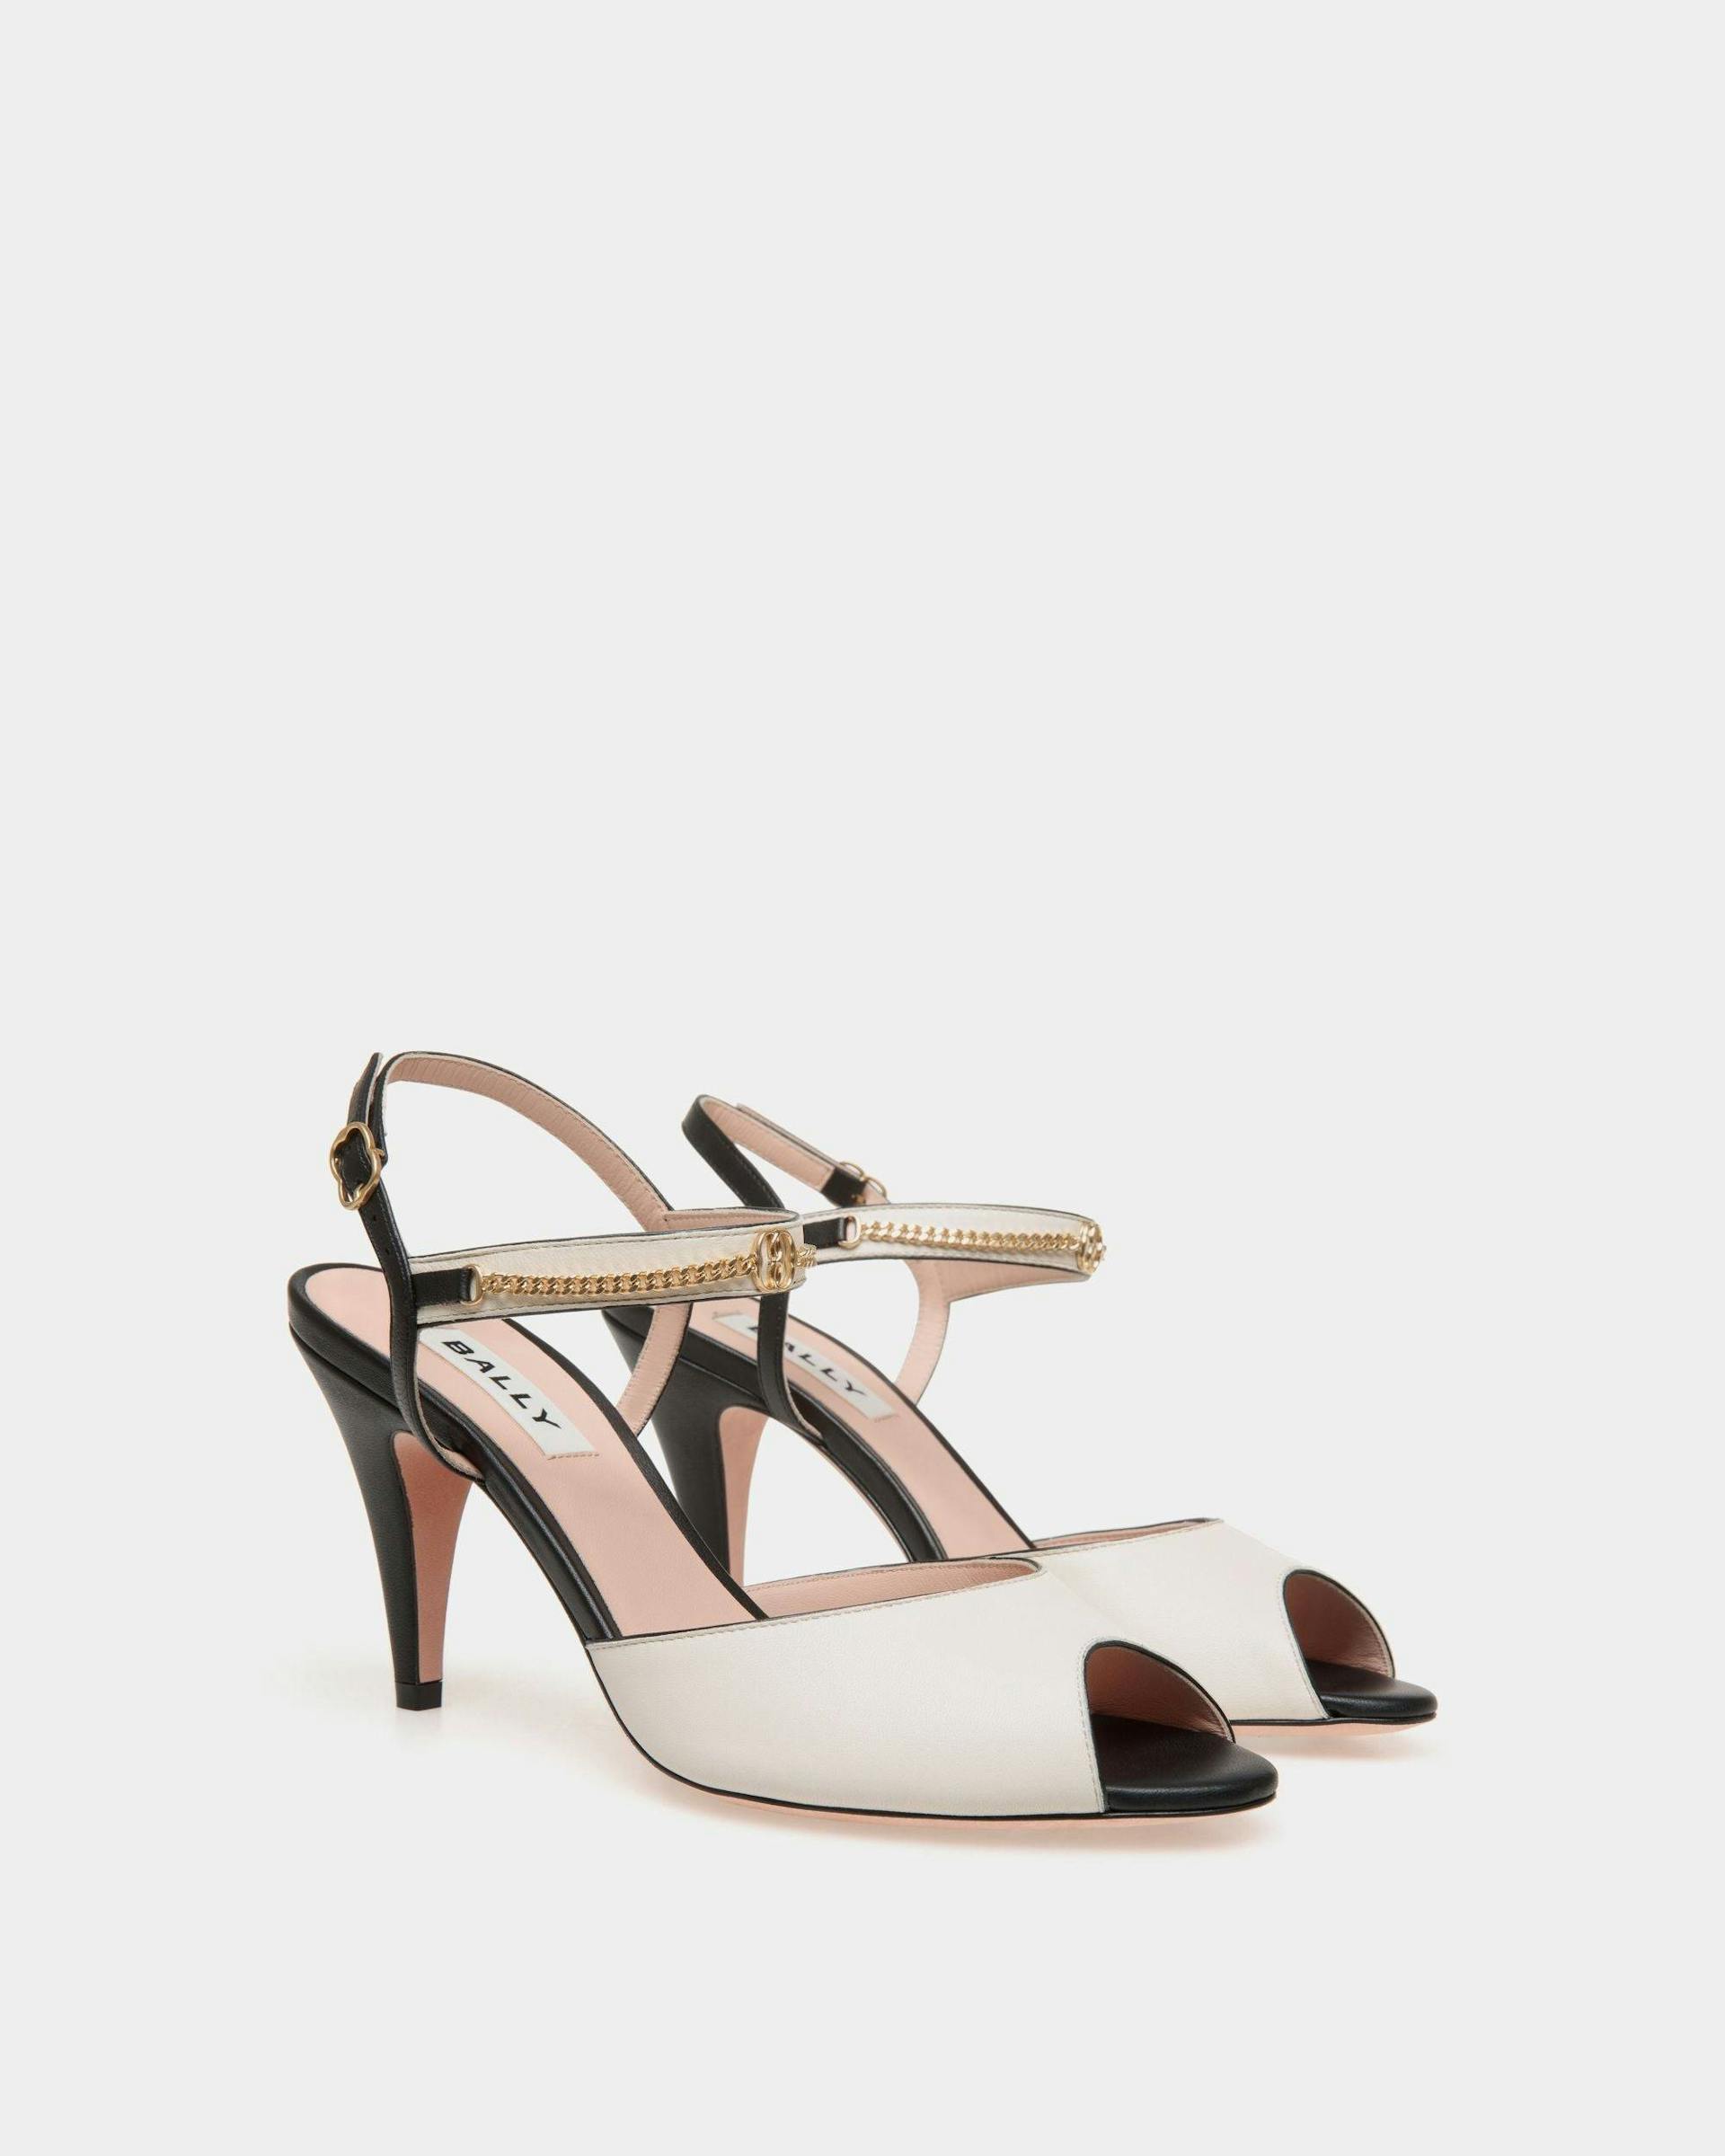 Women's Daily Emblem Heeled Sandal in Black and White Leather | Bally | Still Life 3/4 Front